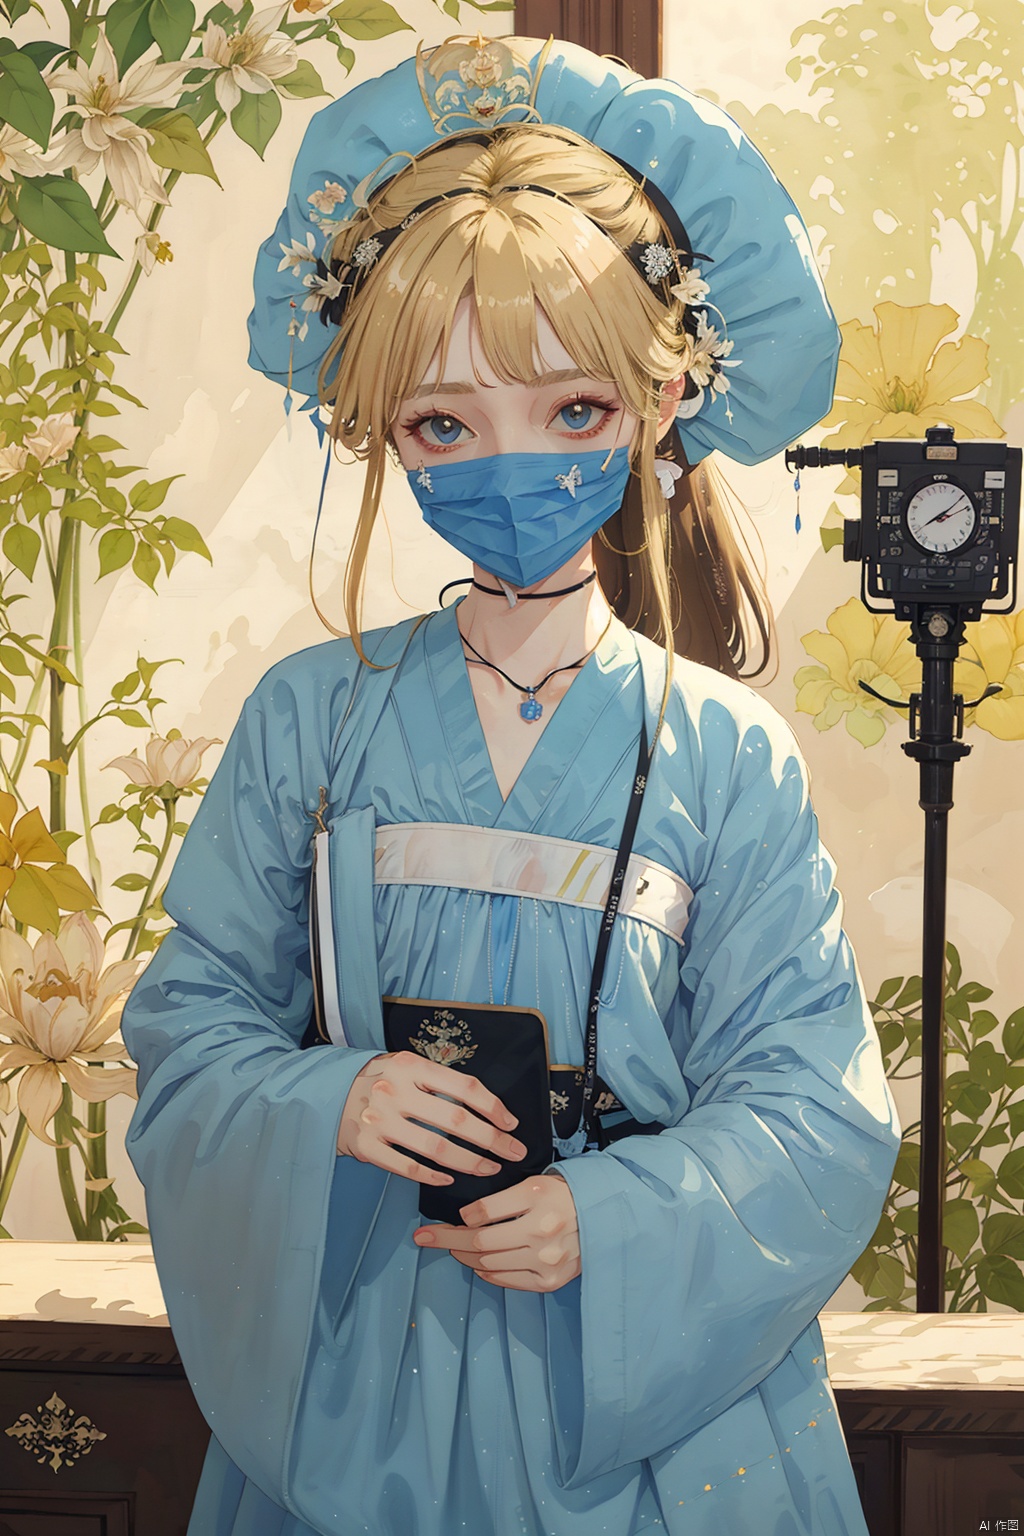 Full-body, (1 female surgeon: 30s), blonde ponytail, blue scrubs, surgical mask, holding a scalpel, stethoscope around neck, standing in a brightly lit operating room, intricate surgical instruments, patient's vital signs monitor, teamwork, precision, life-saving, medical expertise.